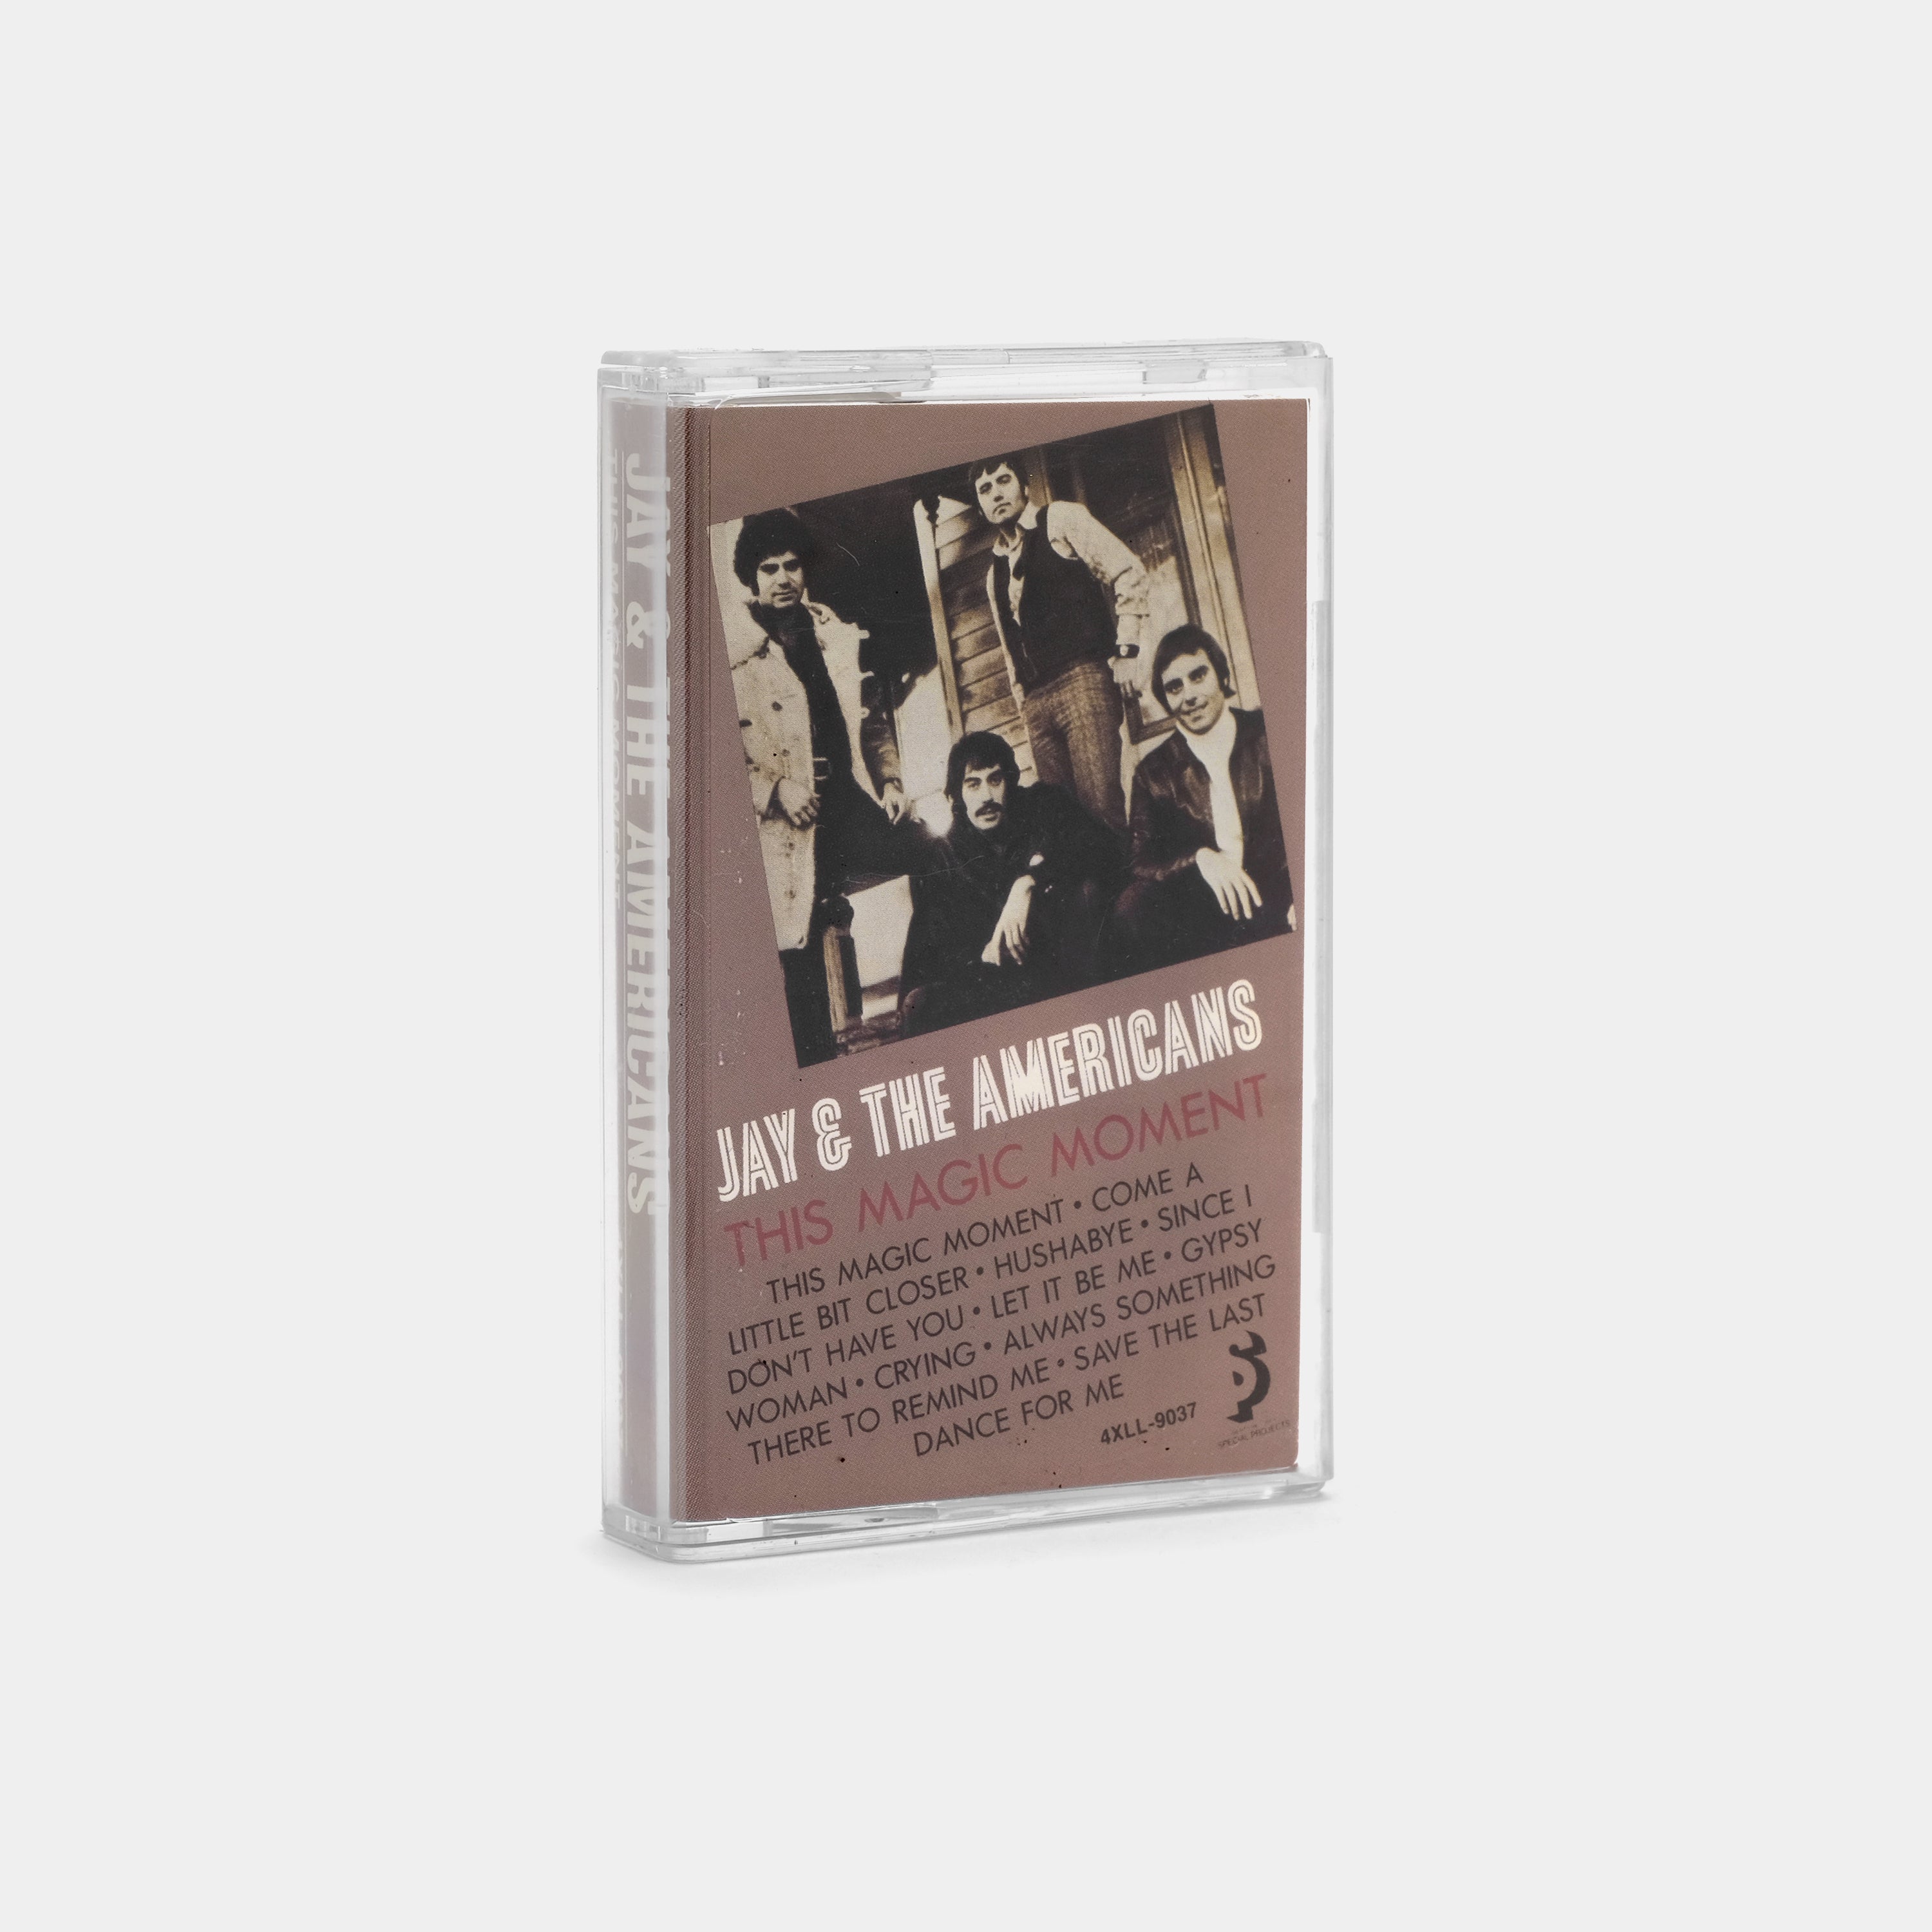 Jay And The Americans - This Magic Moment Cassette Tape